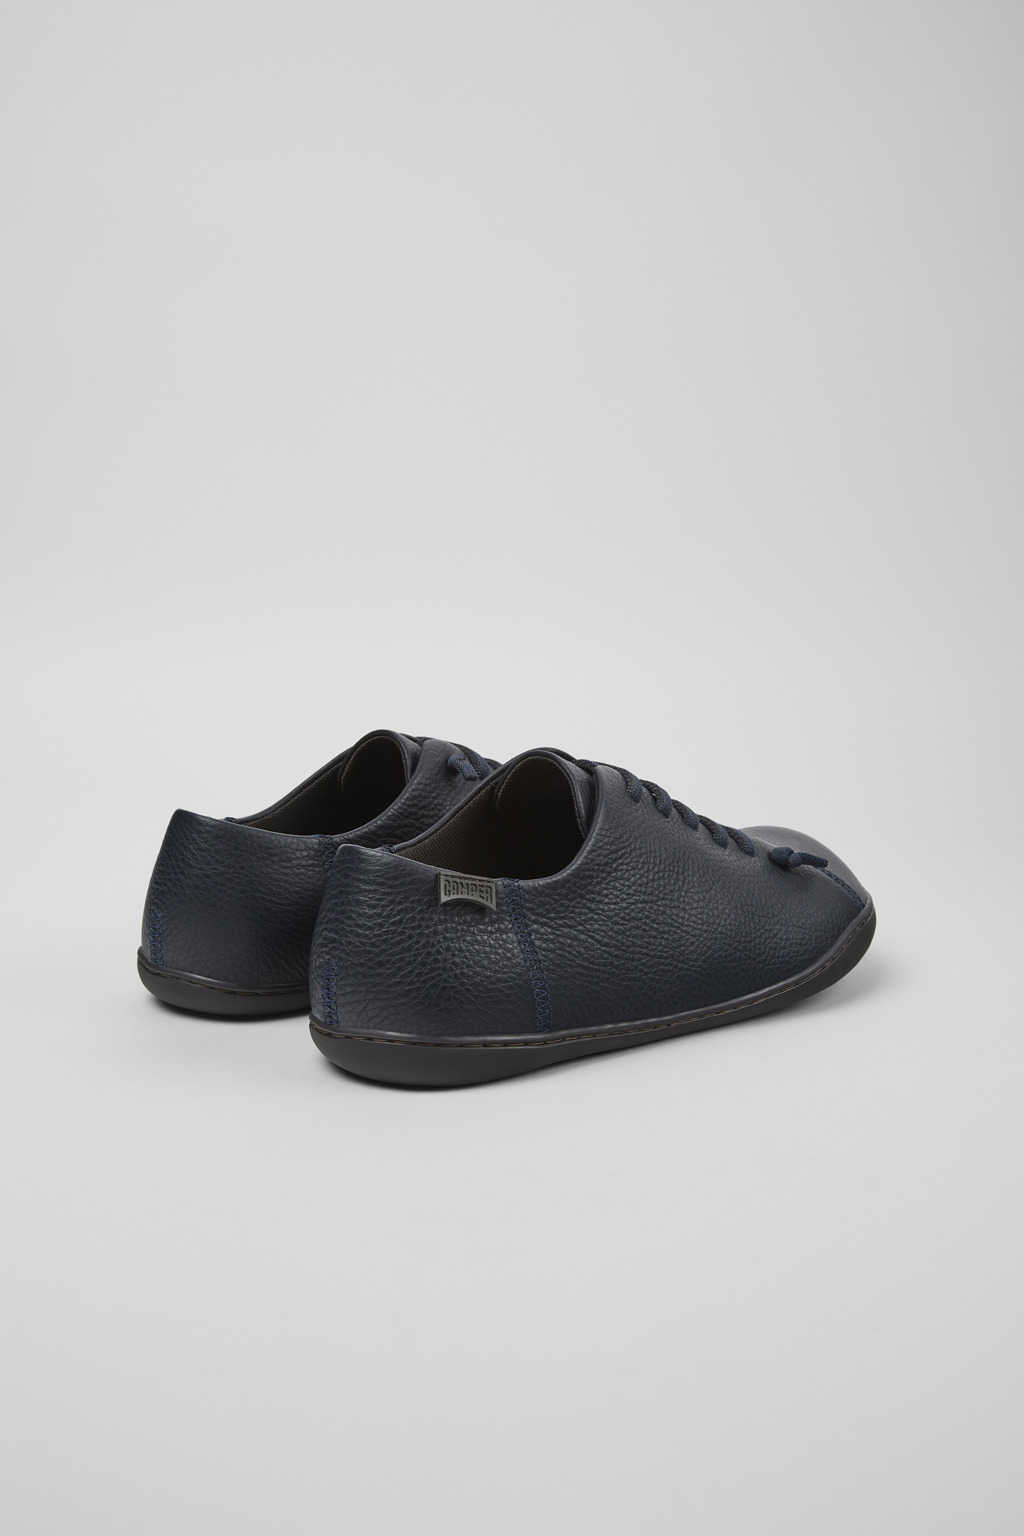 Peu Blue Lace-Up for Men - Fall/Winter collection - Camper USA